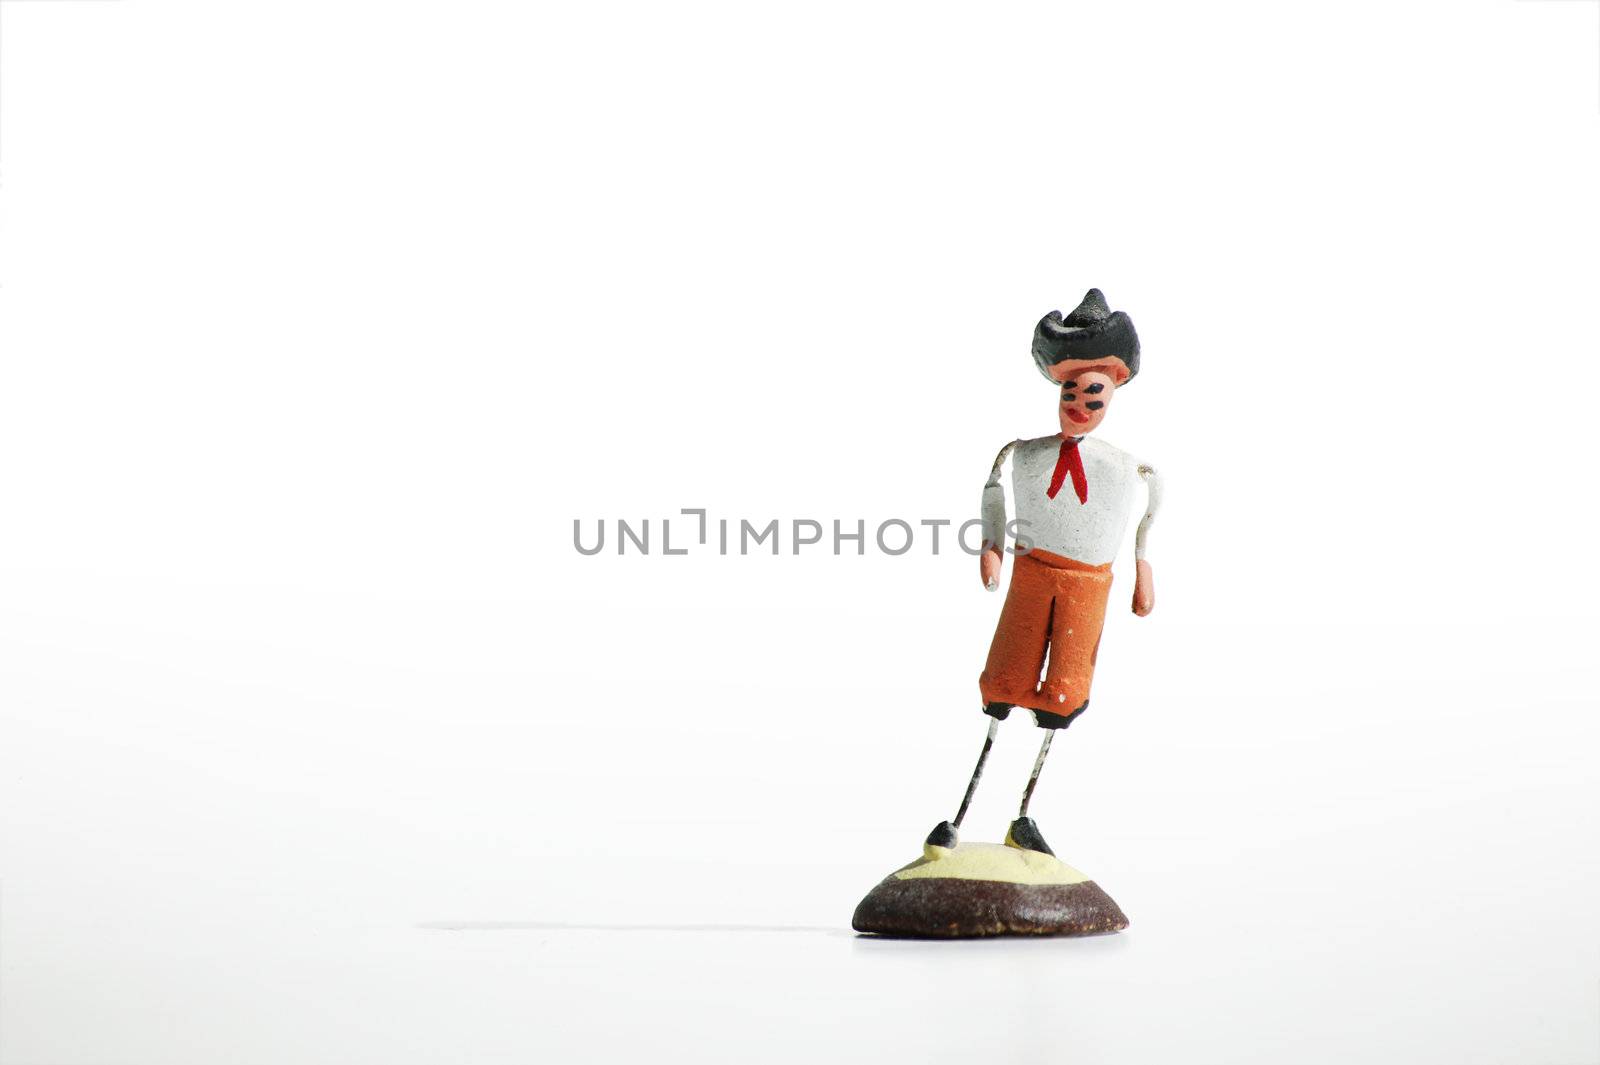 Mexican Clay Toy Figurine by Creatista